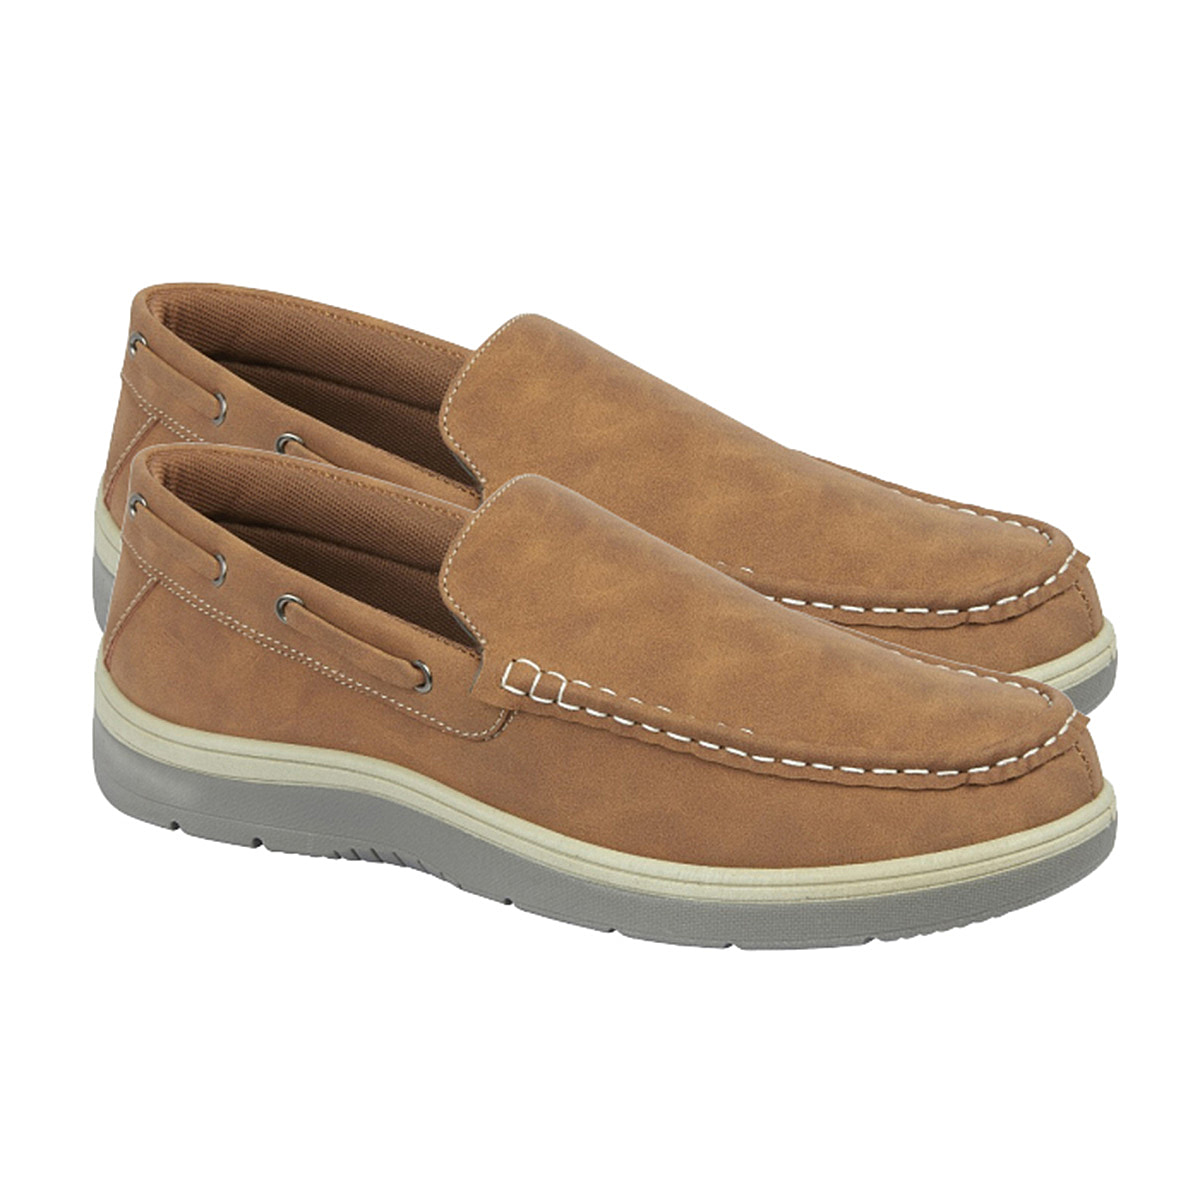 Exmouth-Mens-Slip-On-Boat-Shoes-Size-7-Brown